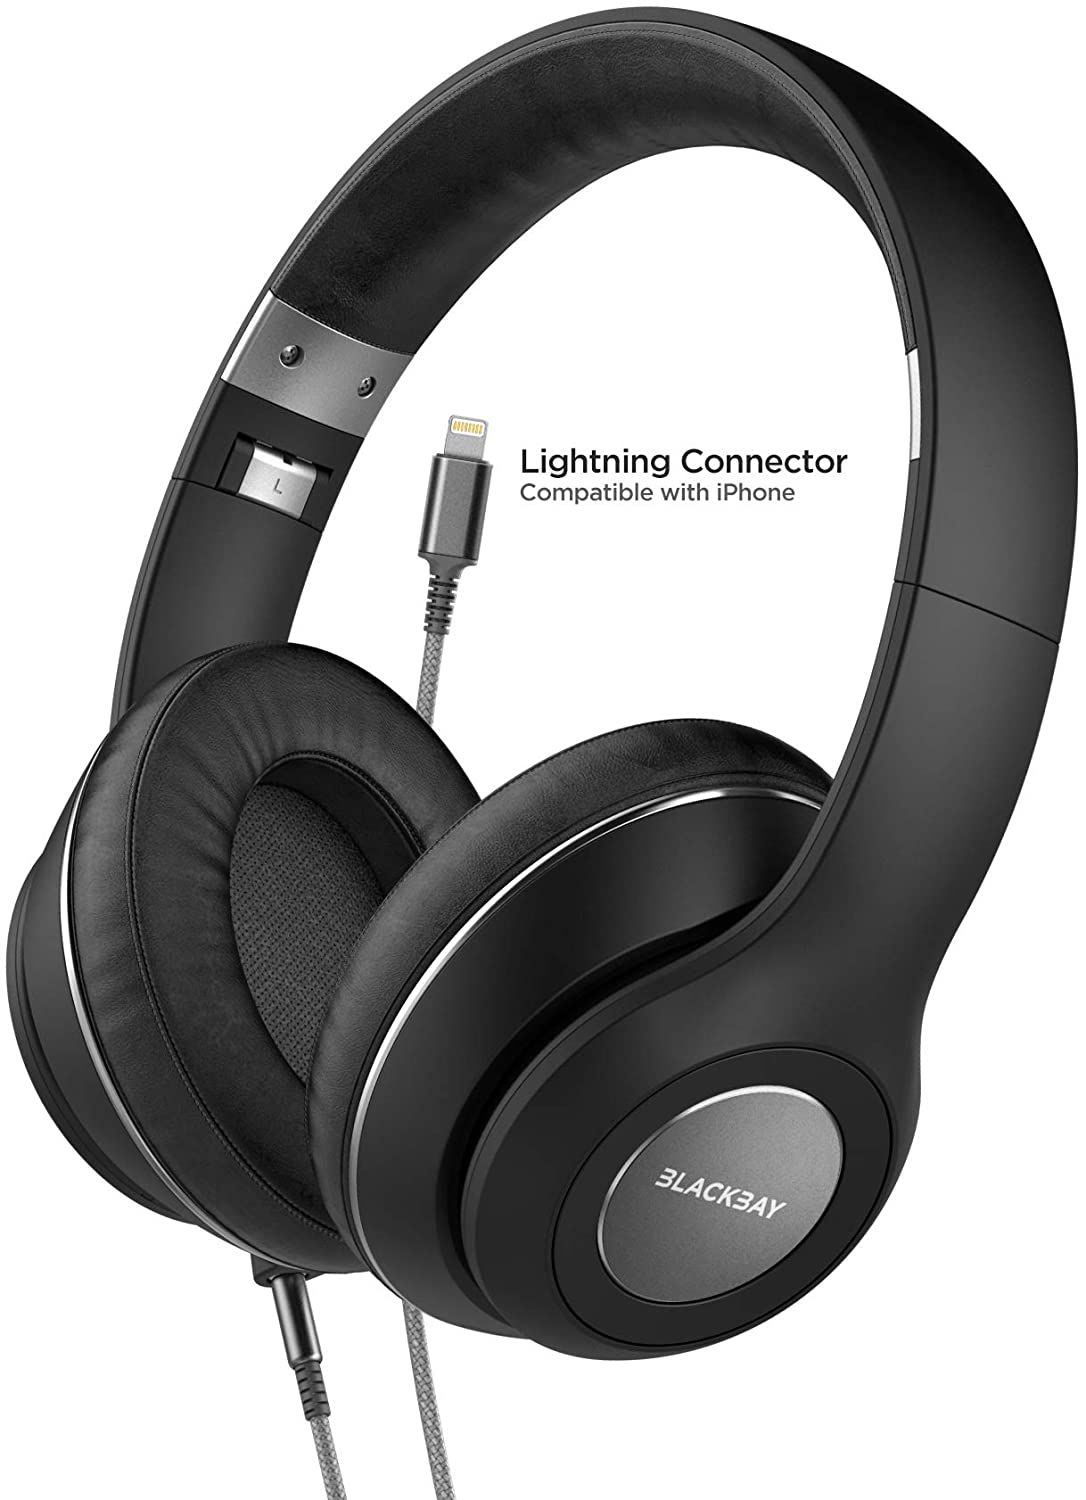 Thore Bluetooth Headphones With Lightning Connector 2